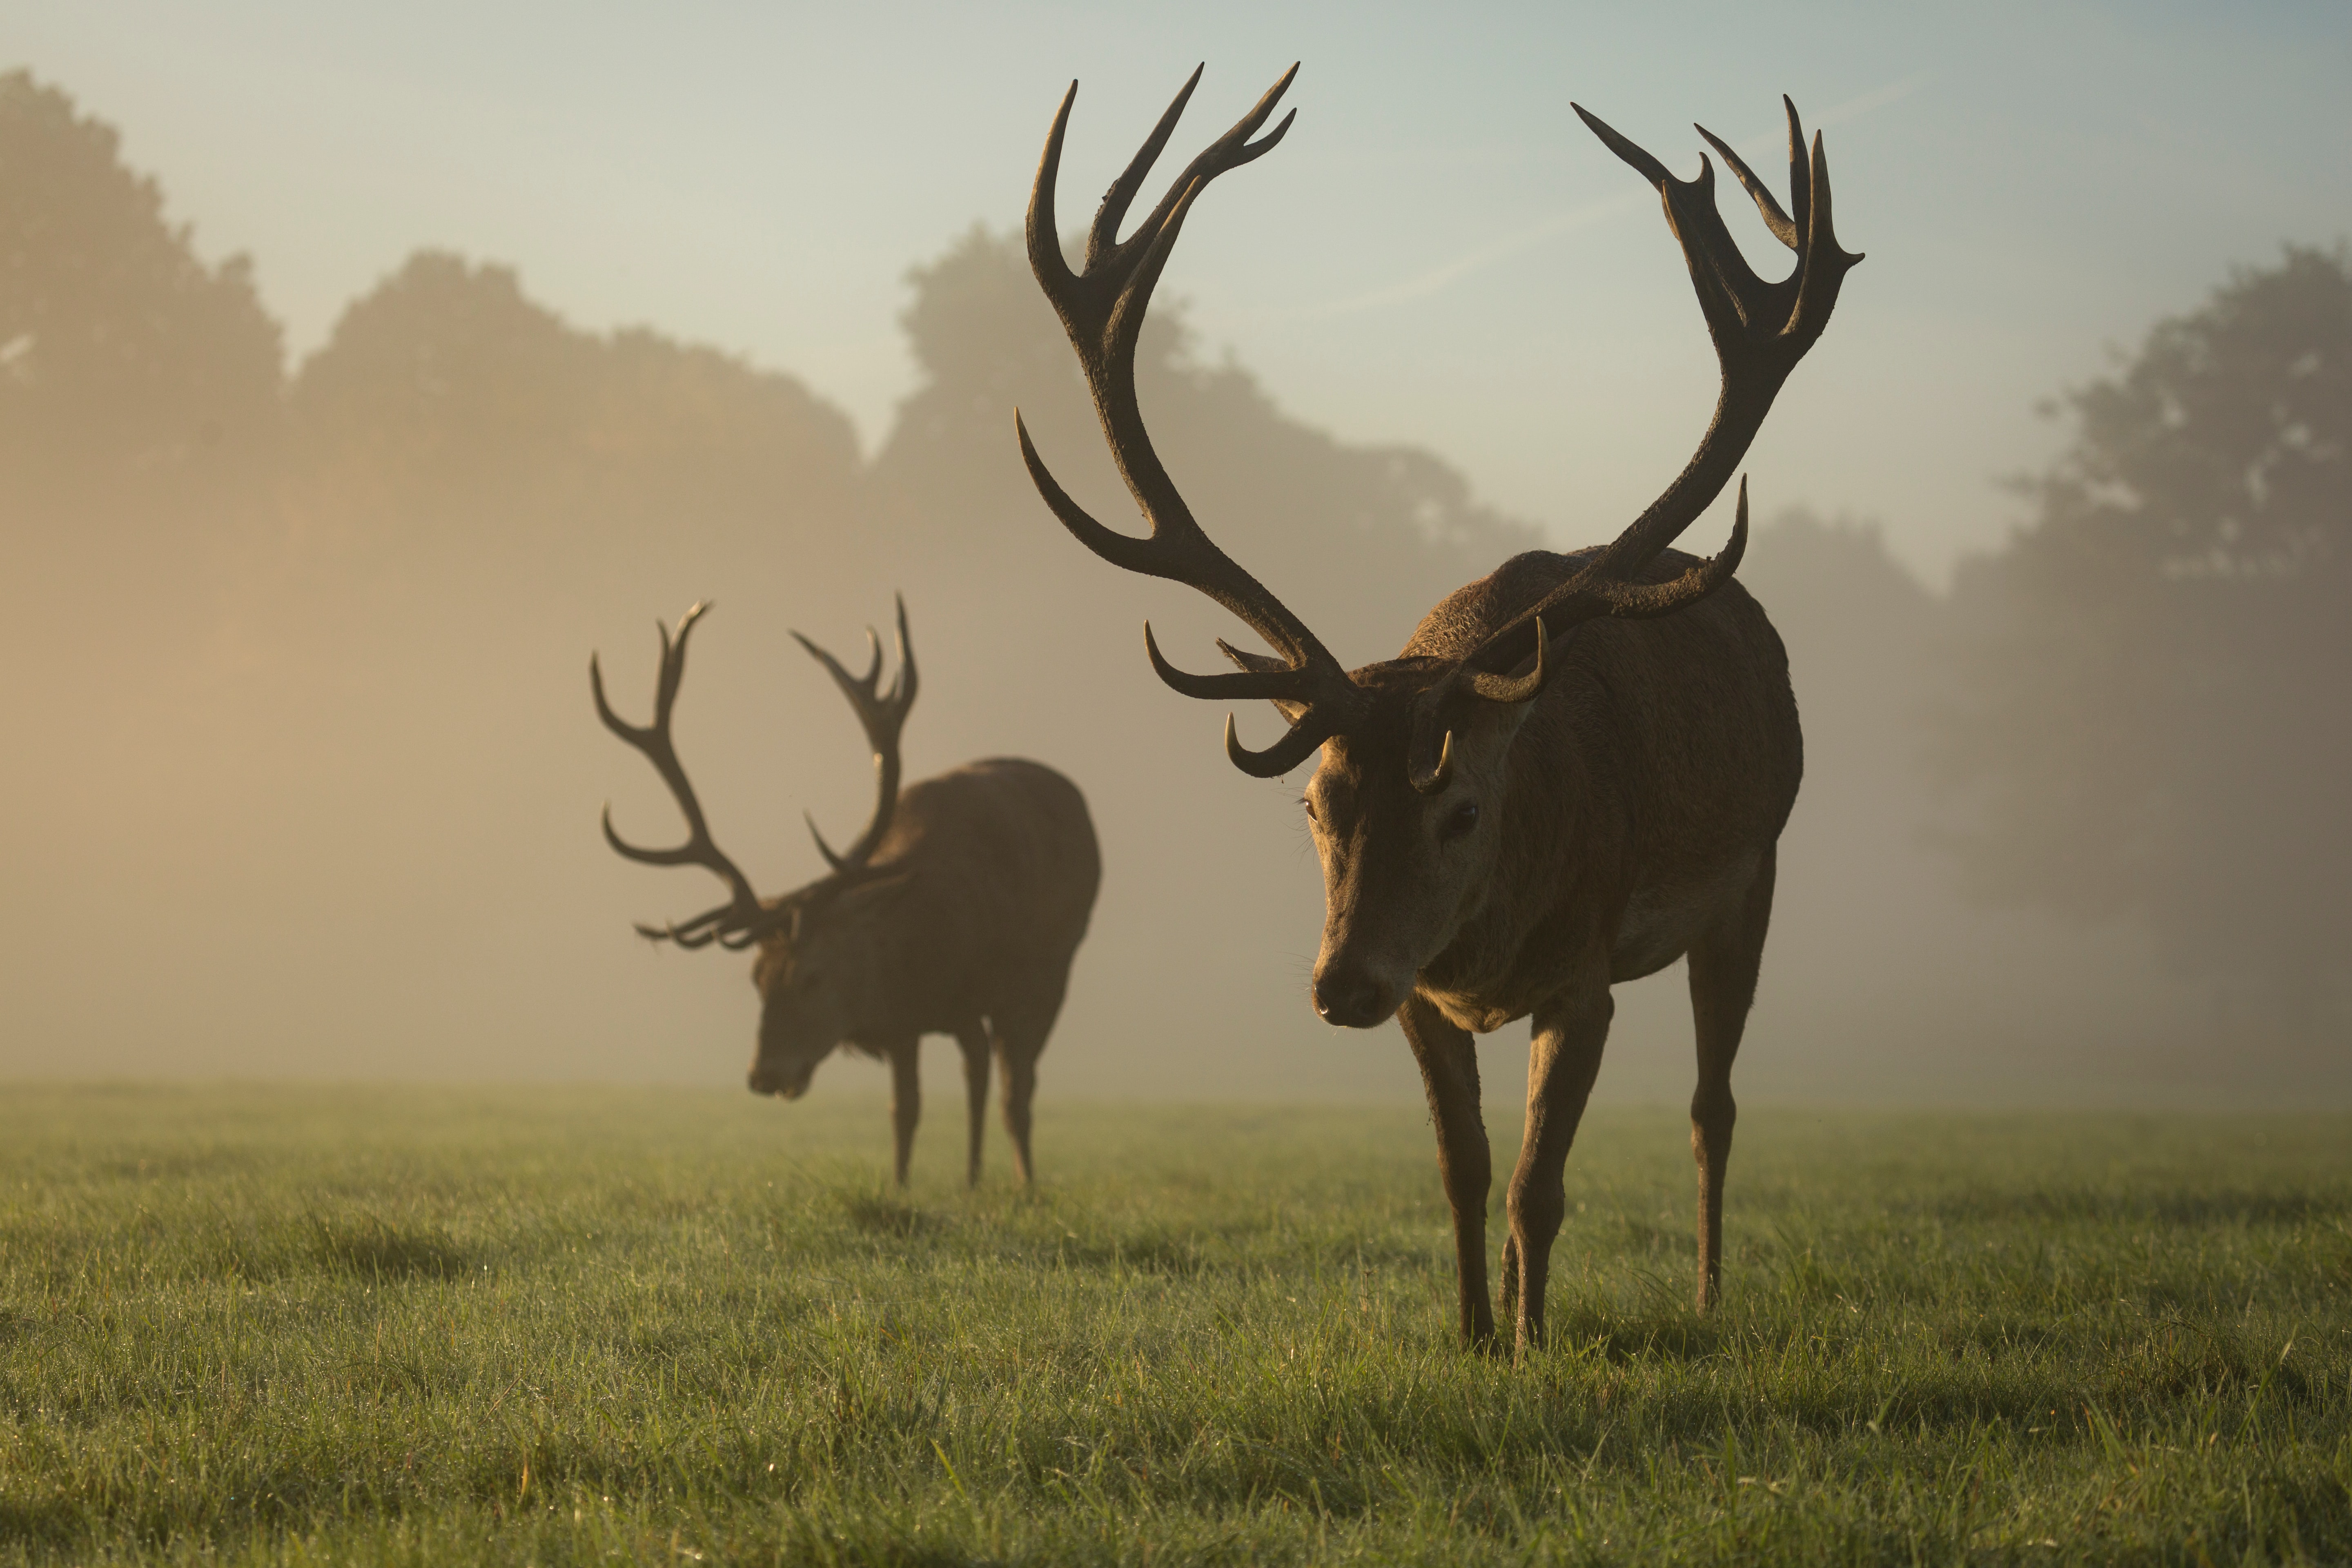 Two red deer stags grazing in the mist, England (Photo credit to Diana Parkhouse) [5760 x 3840]